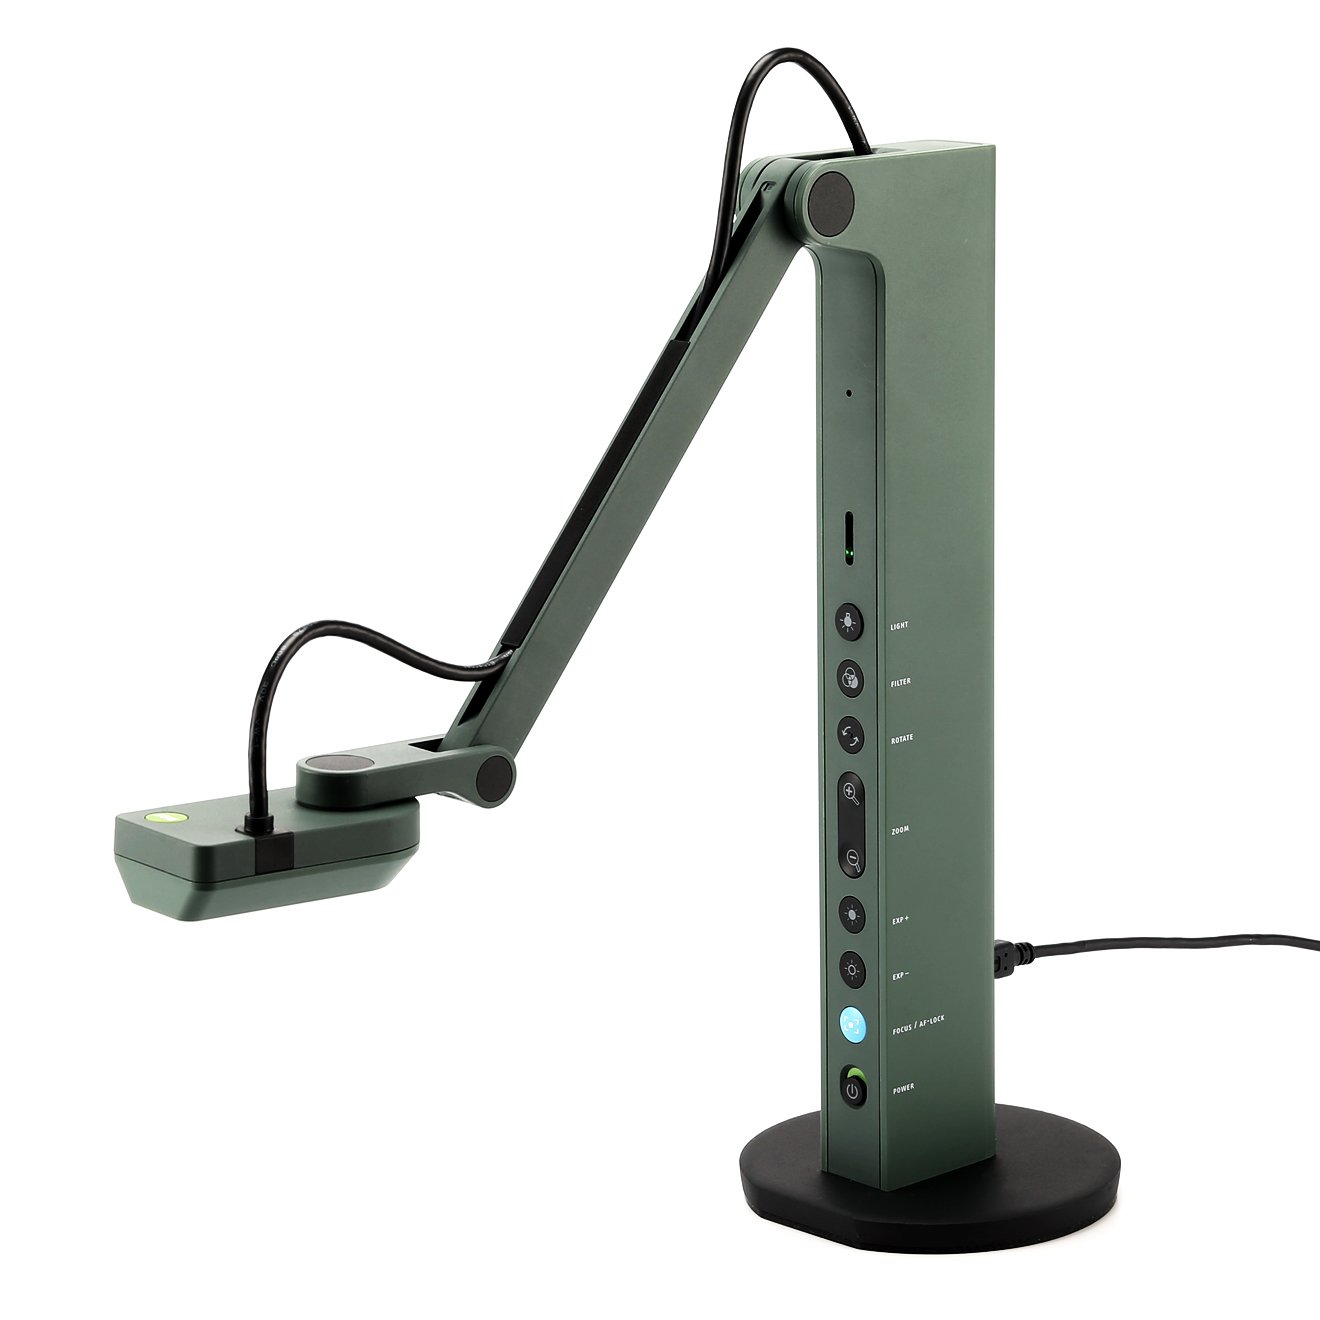 IPEVO VZ-R HDMI/USB Dual Mode 8MP Document Camera — Mac OS, Windows, Chromebook Compatible for Live Demo, Web Conferencing, Remote Teaching, Distance Learning, 8 Megapixel (5-883-4-01-00)